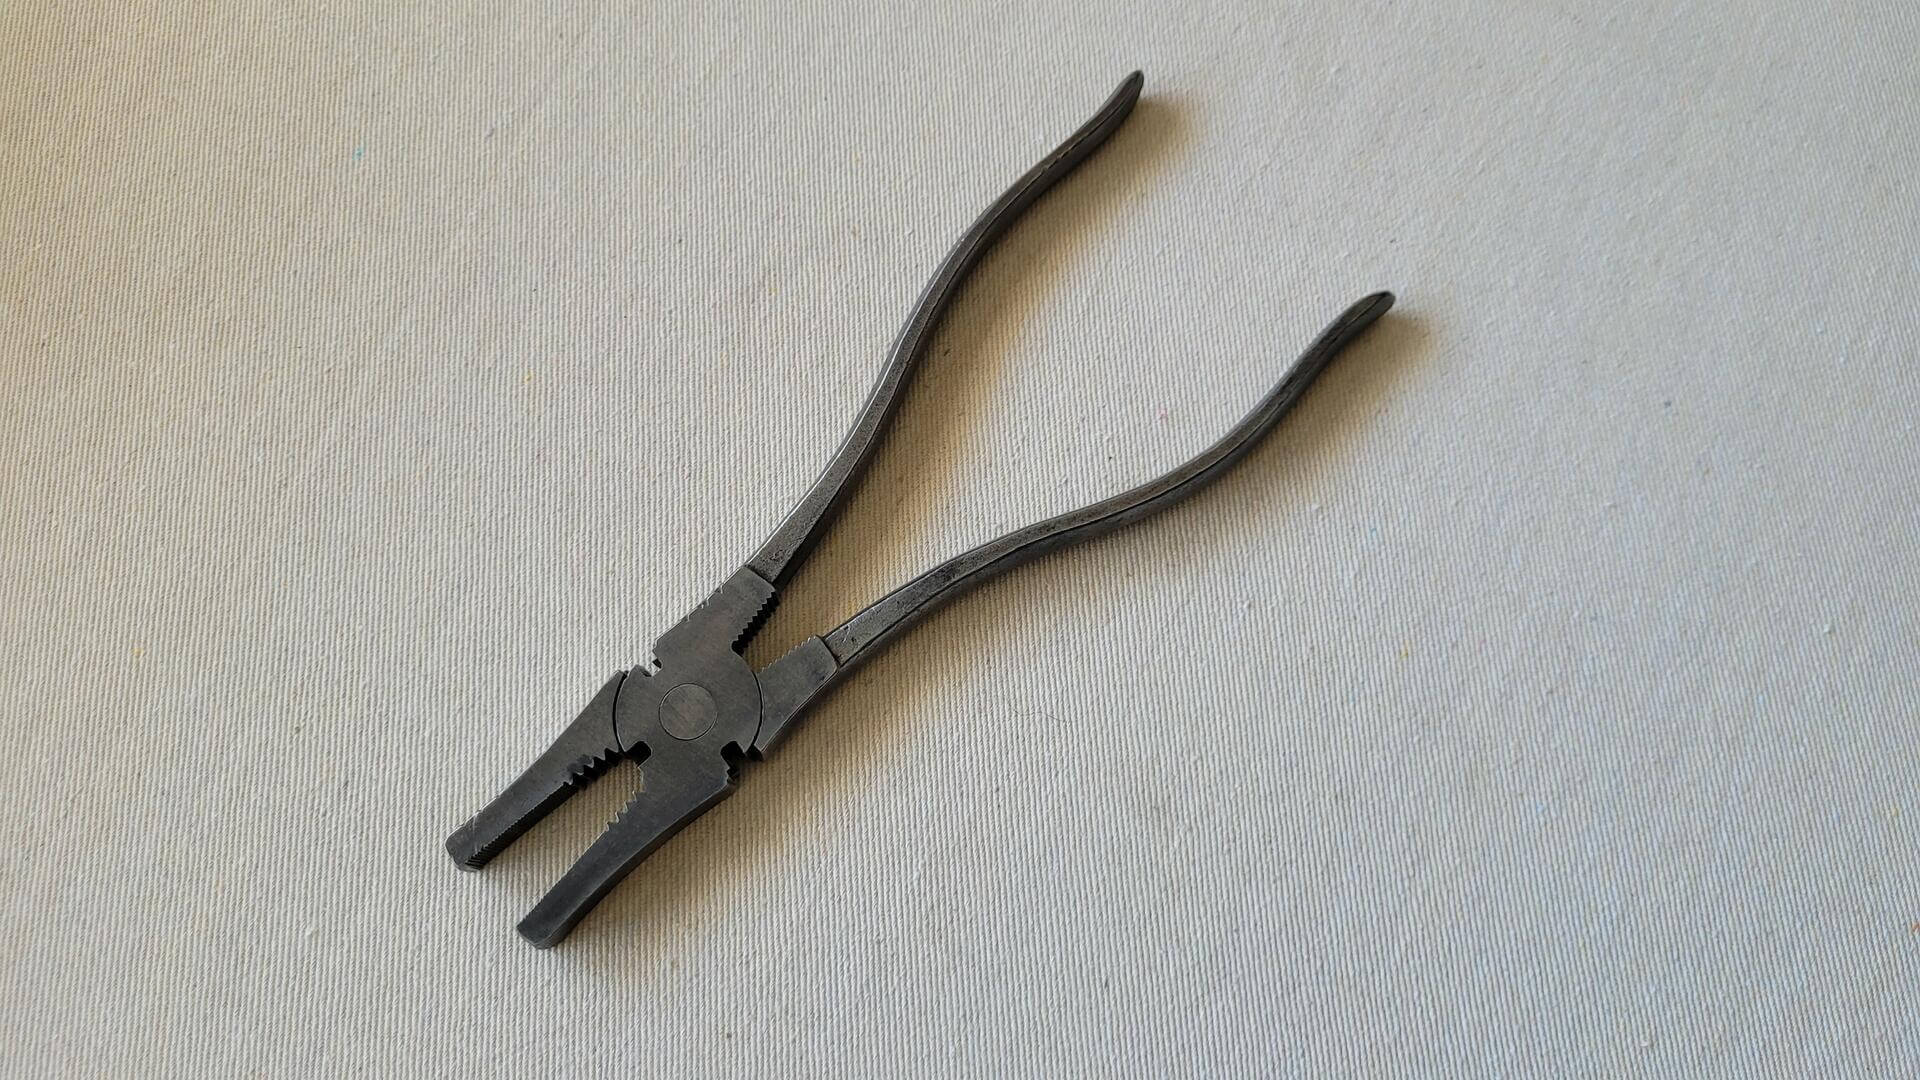 Vintage fence wire cutters and pliers 9 1/2 inches with the bottom set of gripping teeth. Vintage made in USA collectible fencing farm and lineman gripping hand tools